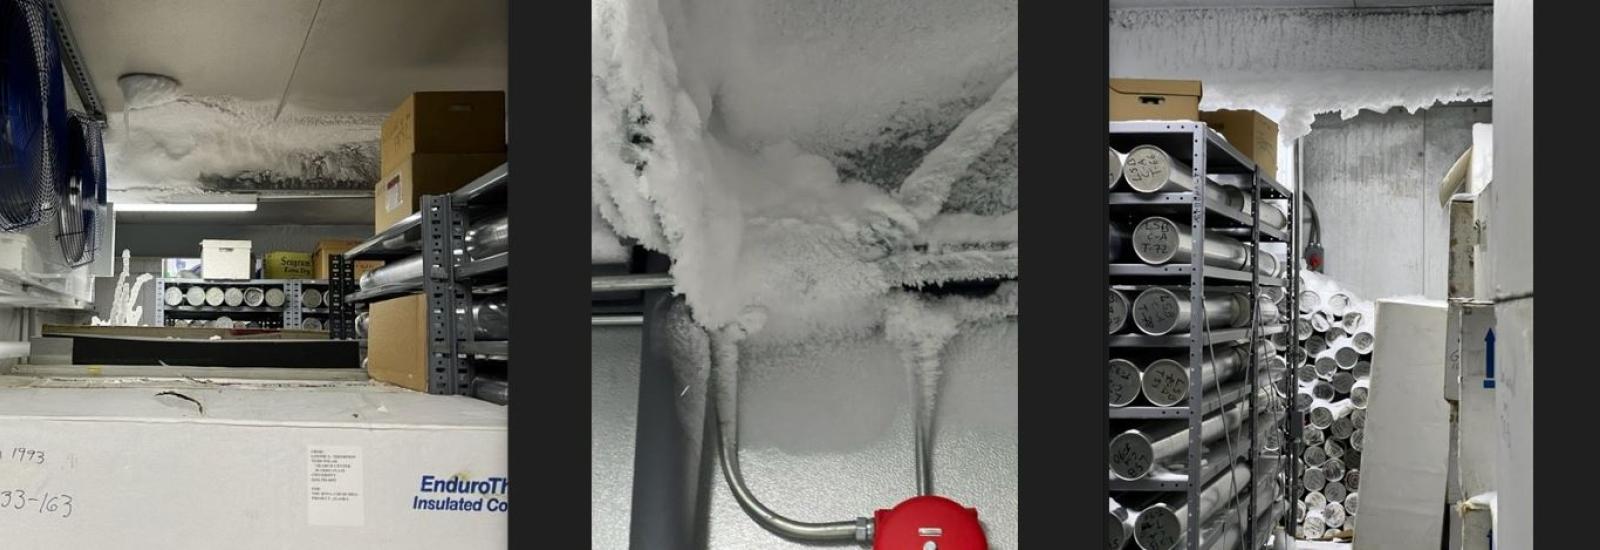 3 images side by side of the Ice Core Facility showing frost buildup on ceiling and around light fixture and fire alarm and on canisters